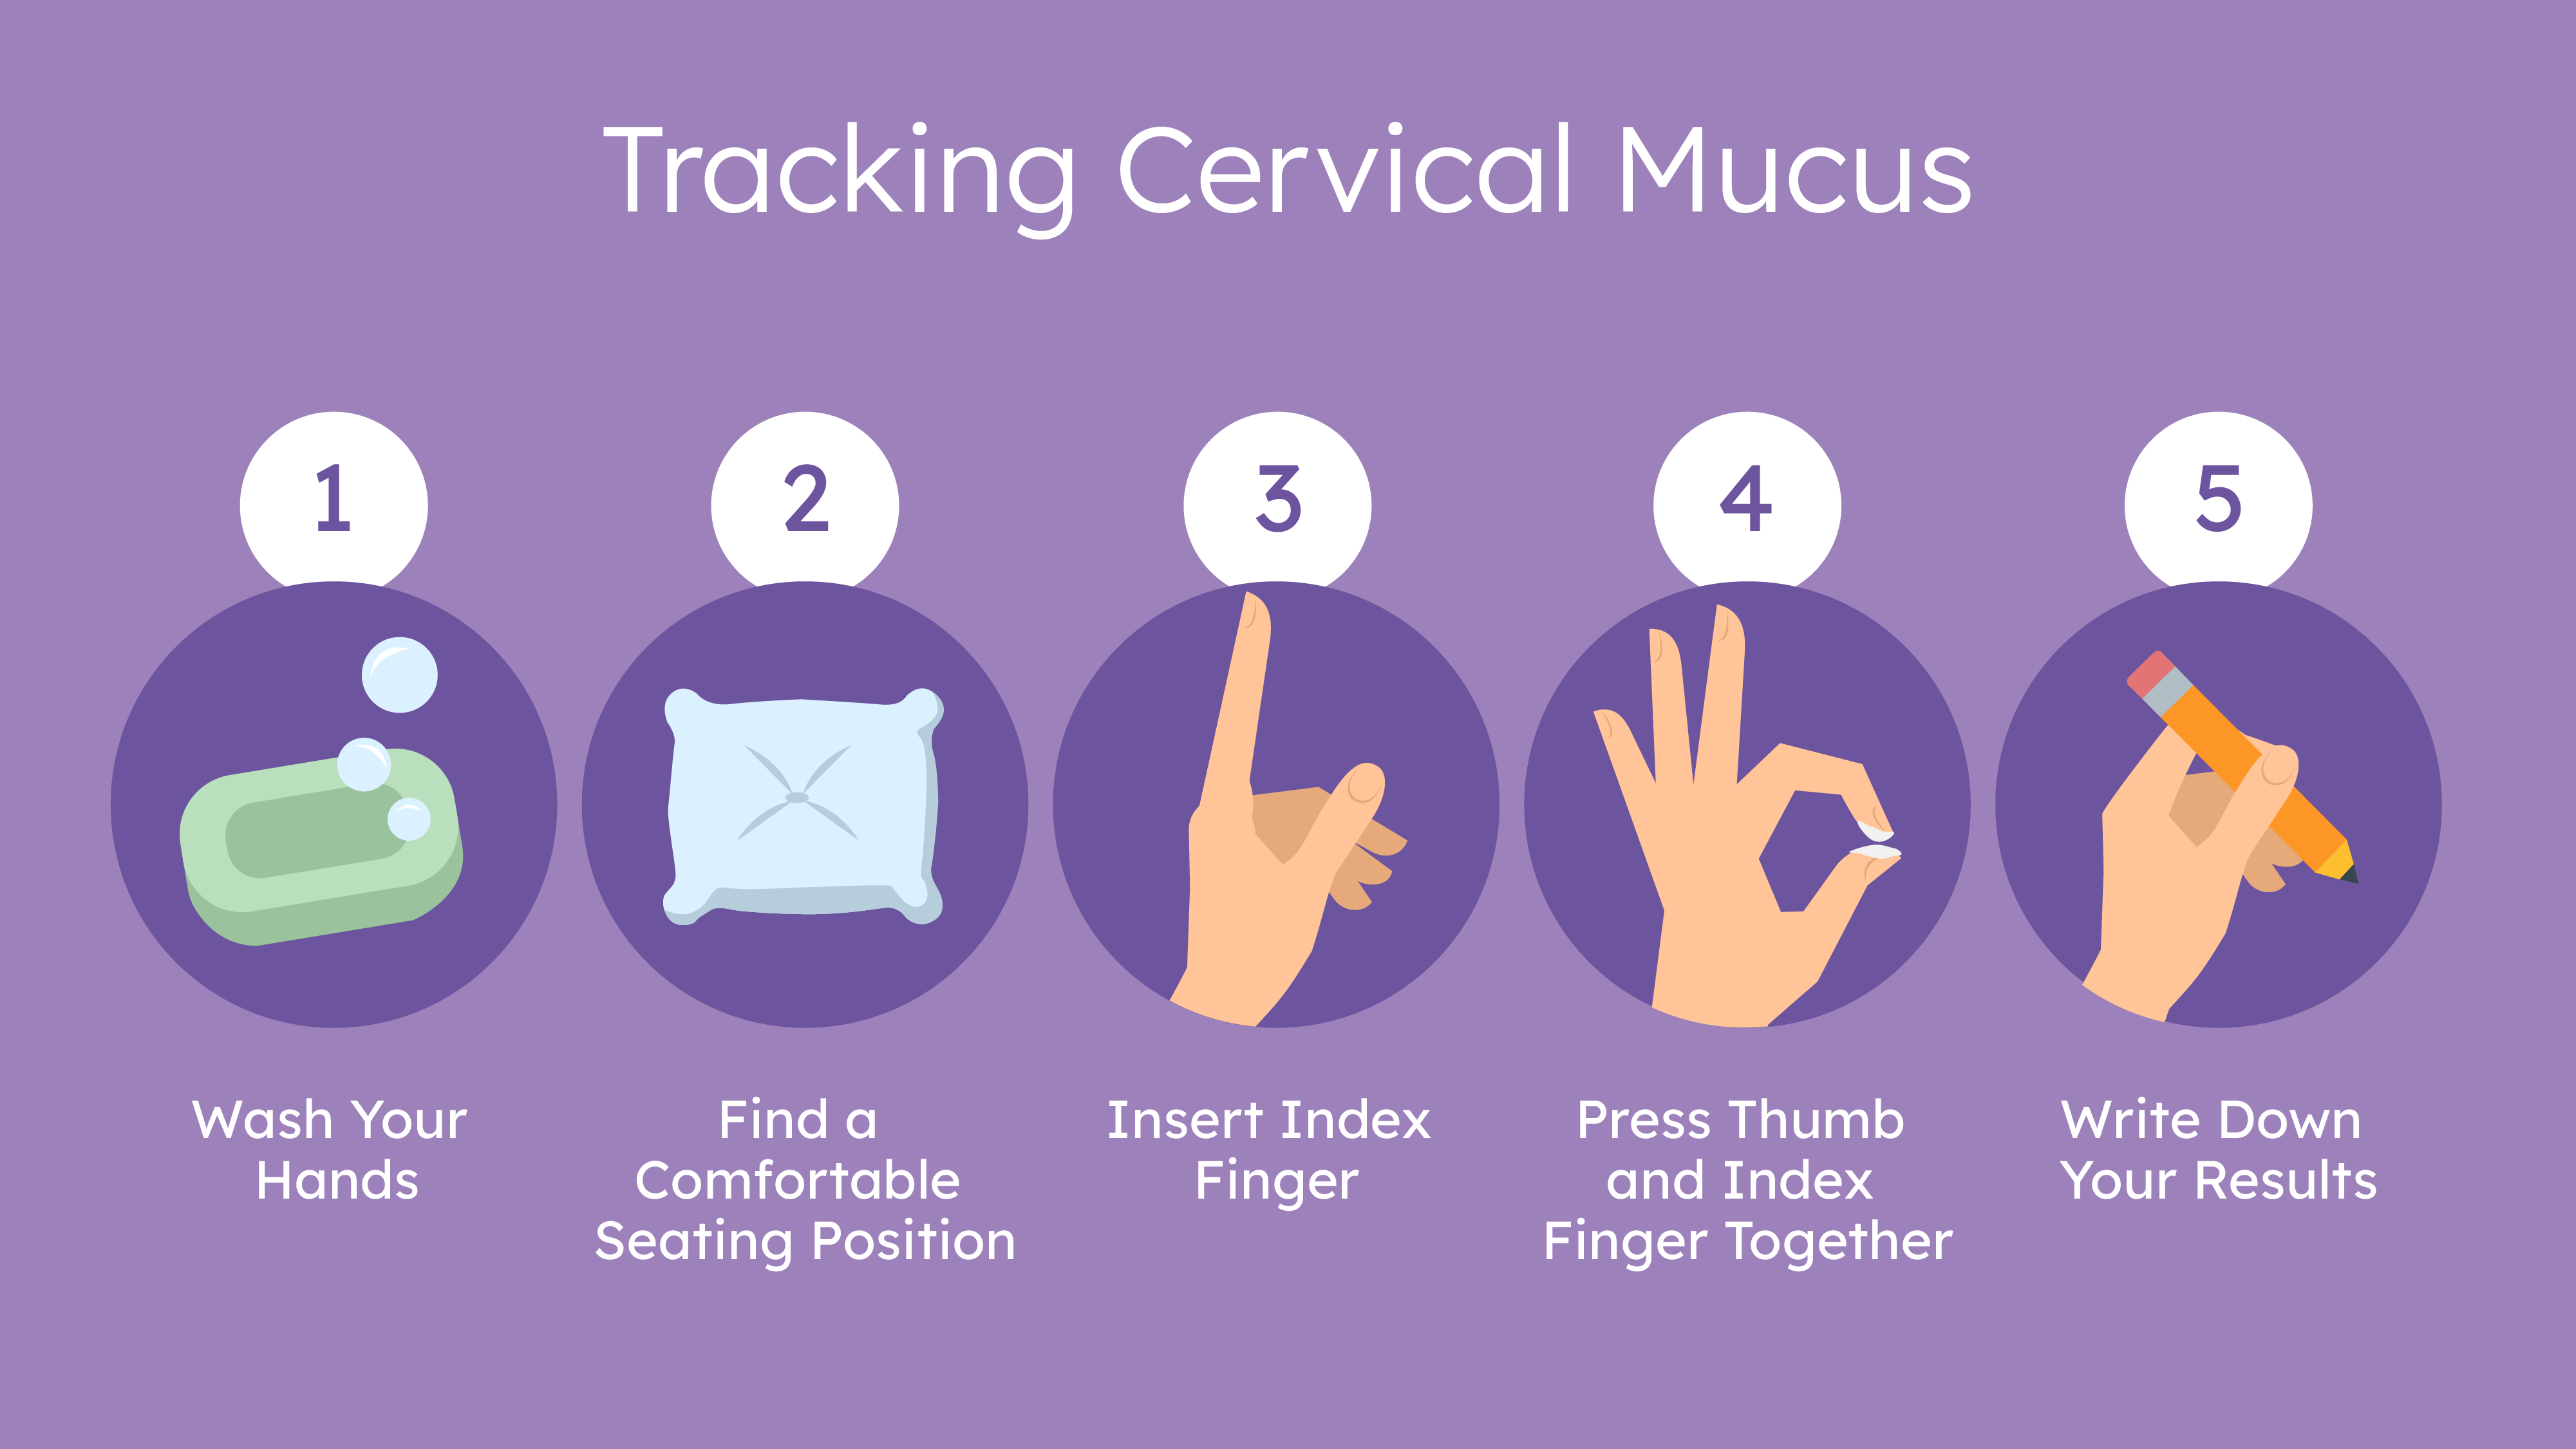 👩‍⚕️You might have noticed that your cervical mucus changes throughou